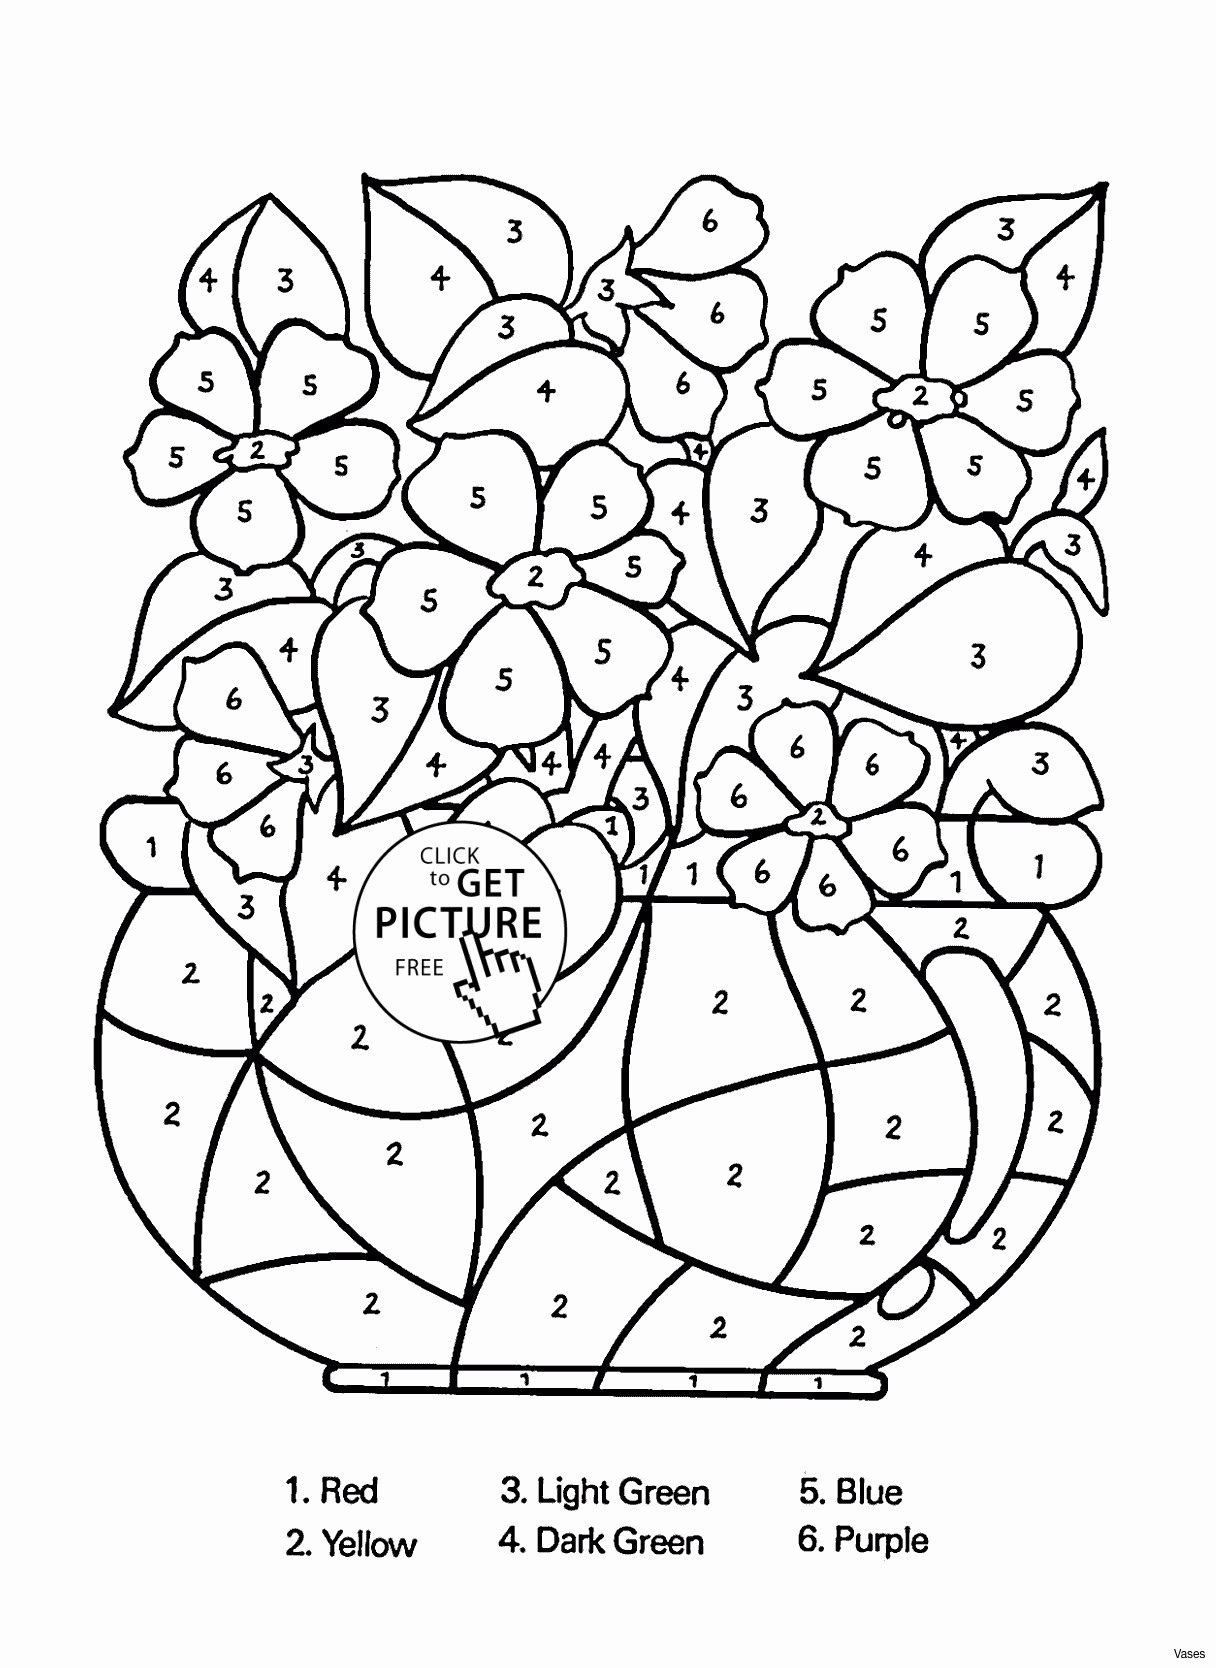 red roses with vase of vases flower vase coloring page pages flowers in a top i 0d and inside vases flower vase coloring page pages flowers in a top i 0d and freehigh quality coloring